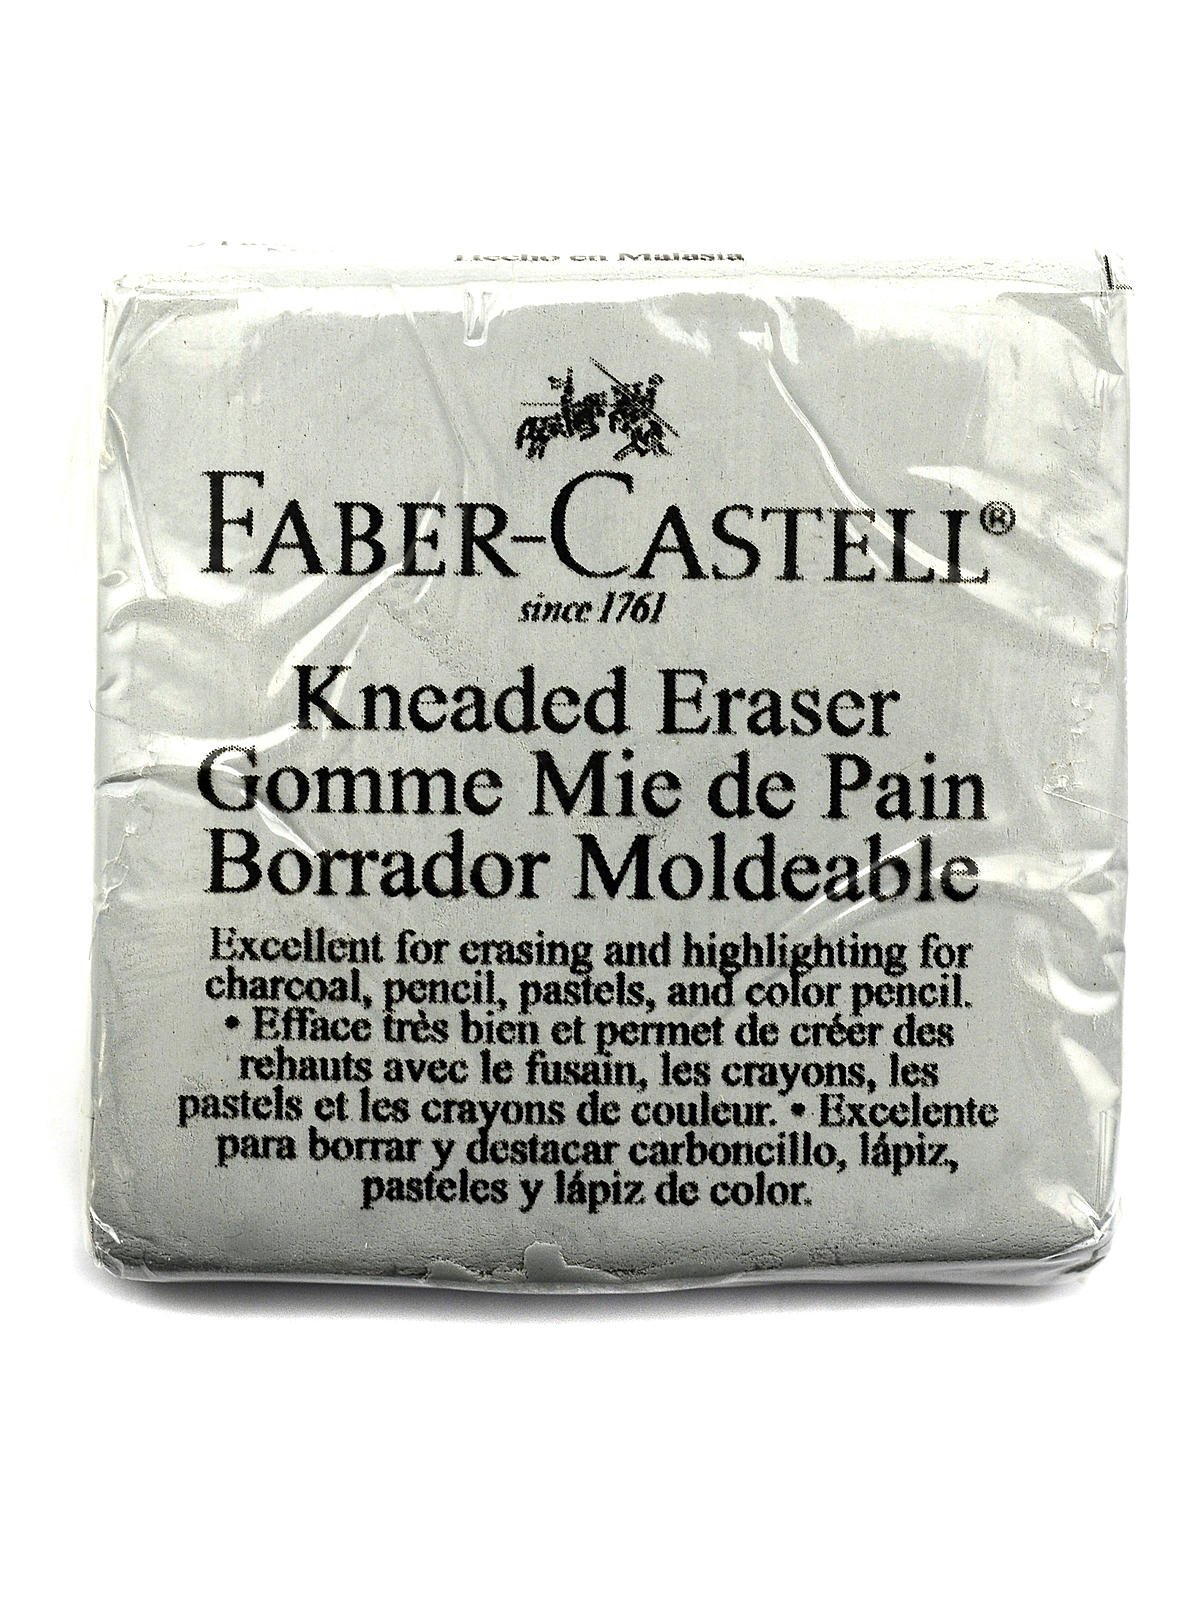 Clay Eraser from Faber Castell